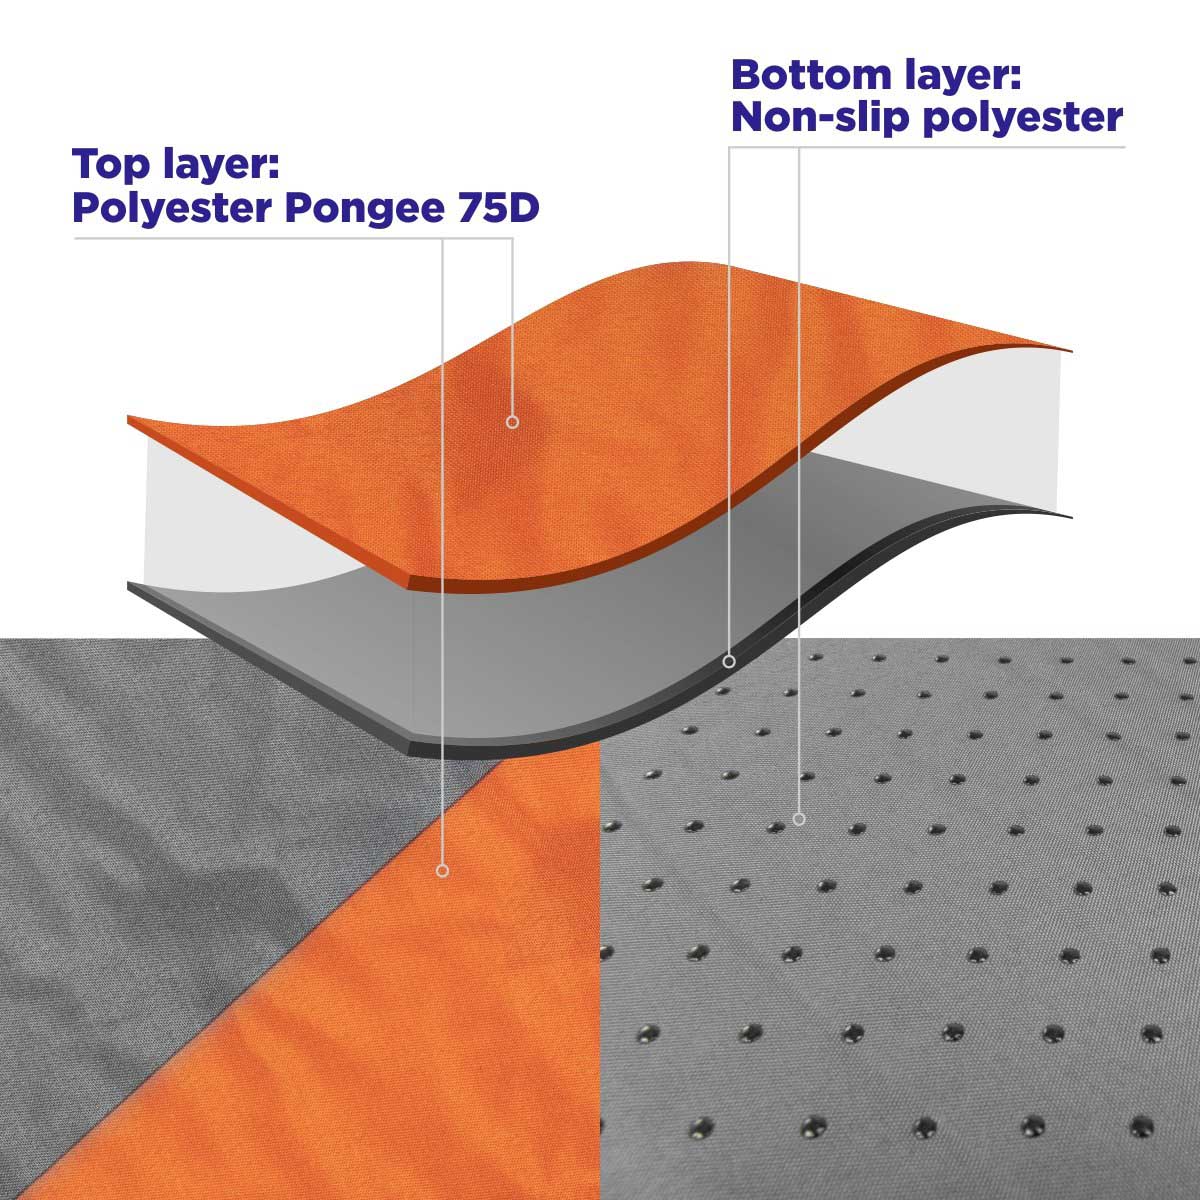 Orange Self Inflating Sleeping Pad with Pillow made of Polyester Pongee 75D and Non-Slip Polyester